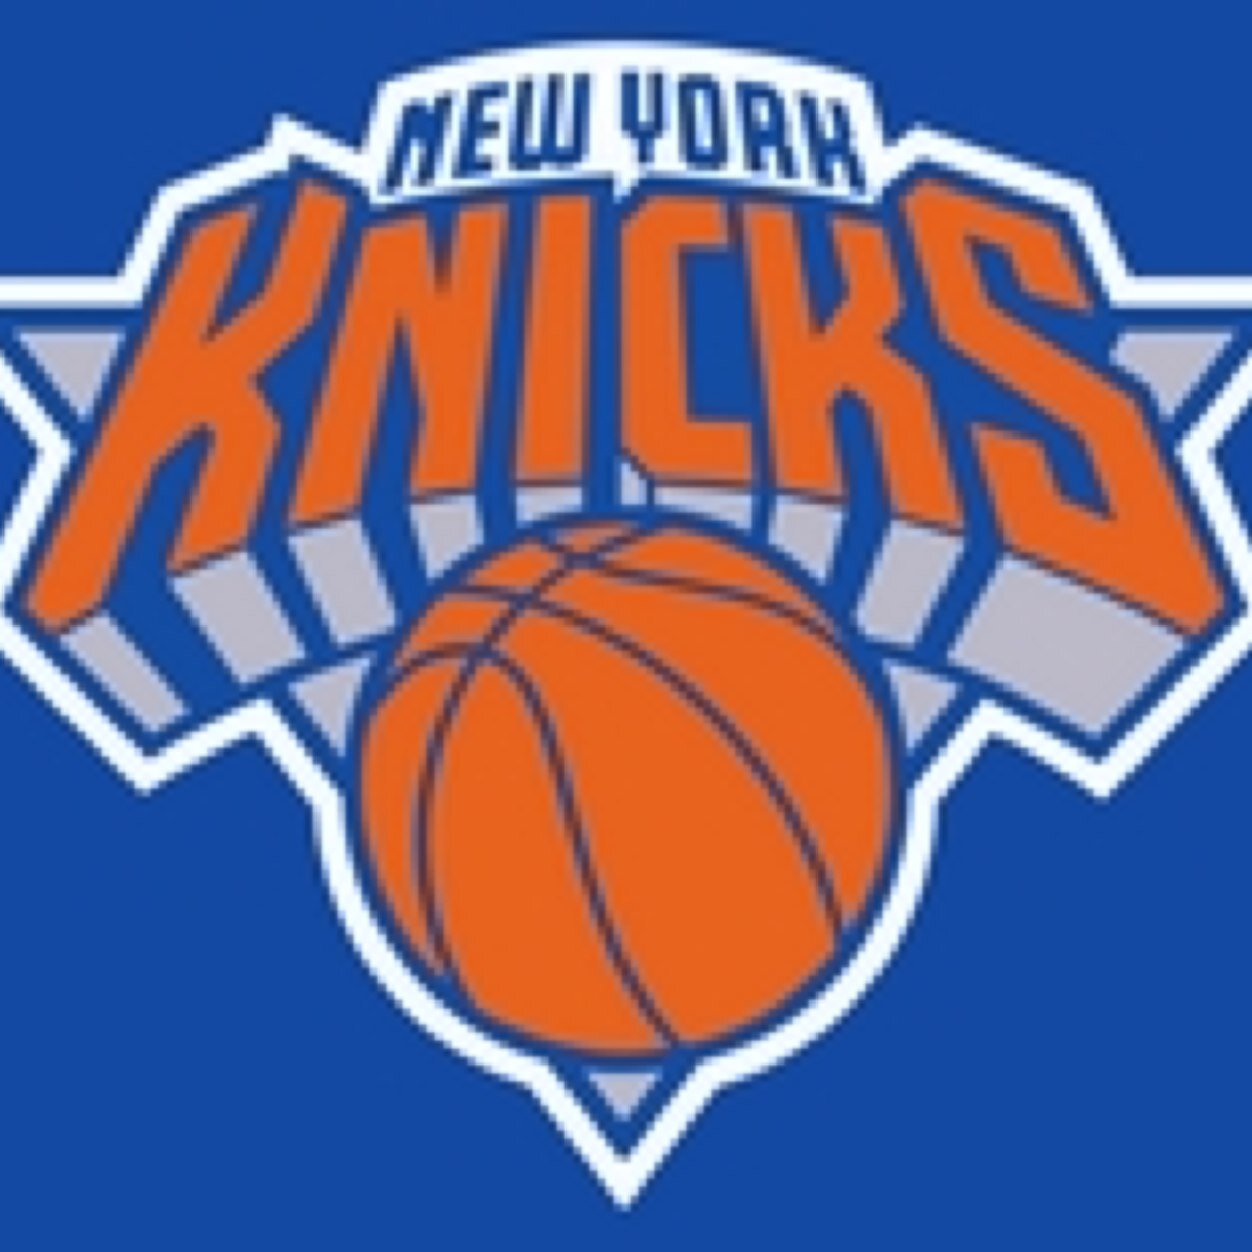 Everything Knicks !                       Follow us and give us a S/O!               #knickstape #NYMADE